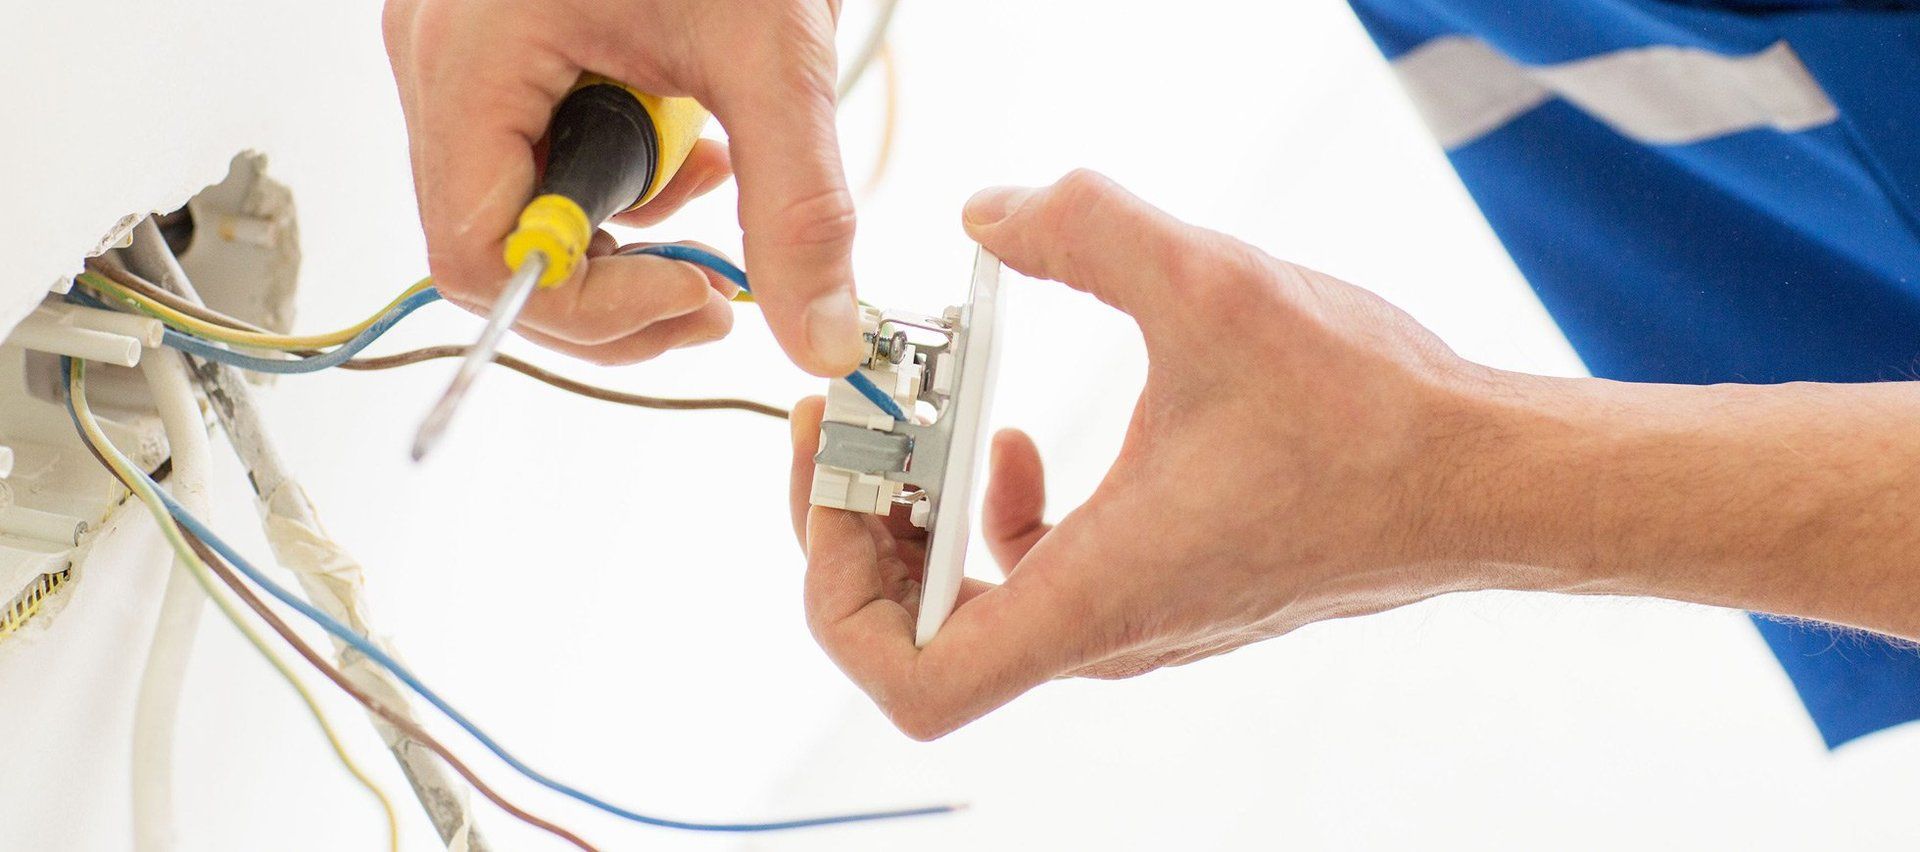 Electrical Maintenance and Repair Service